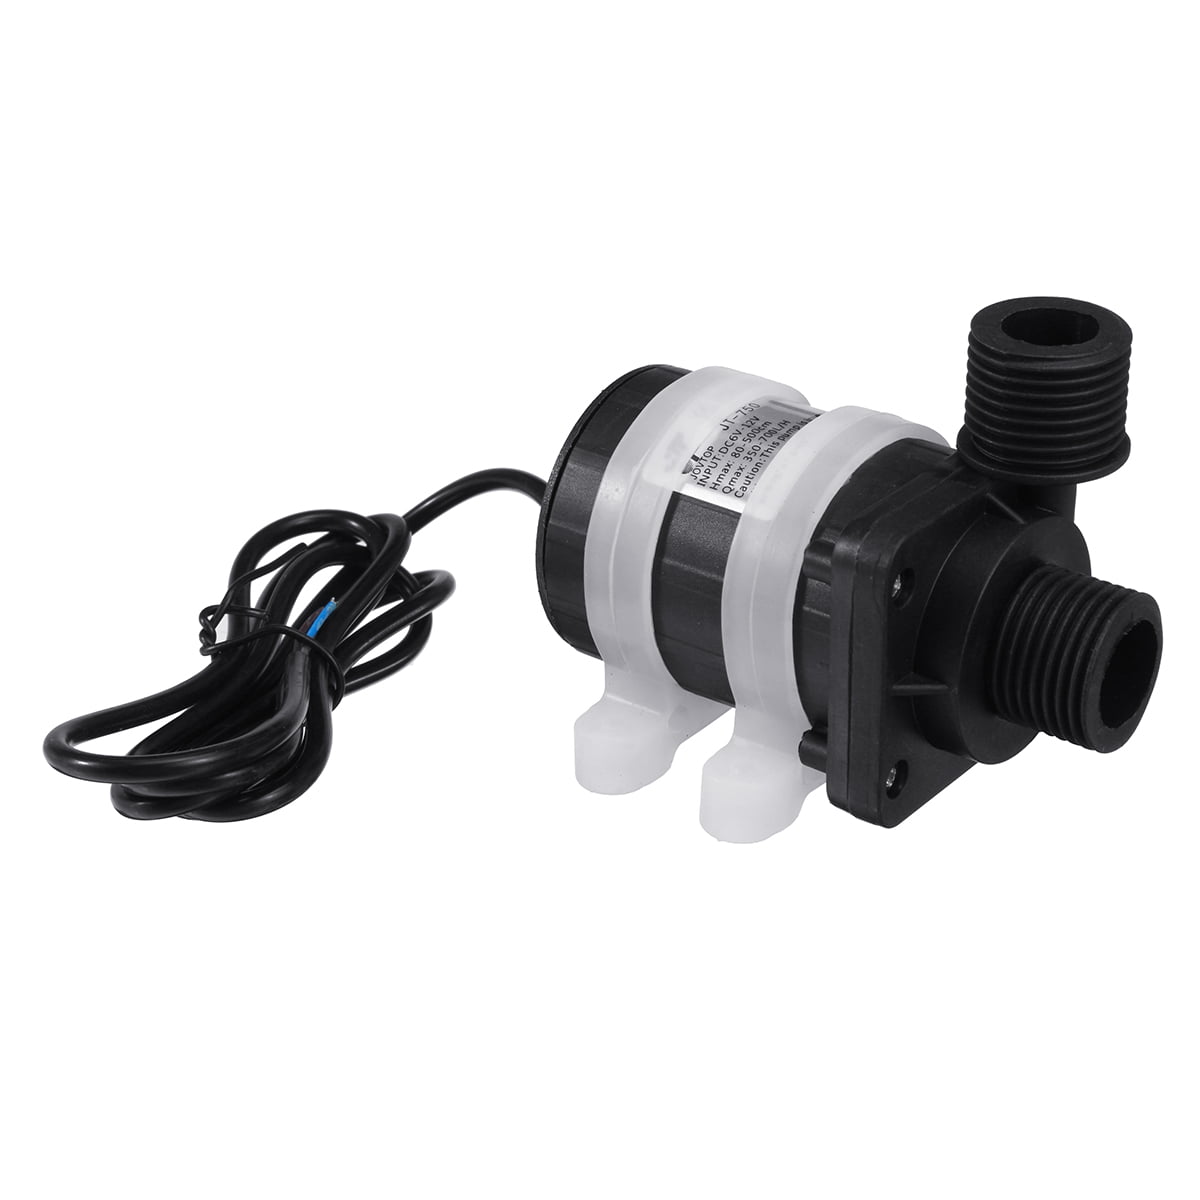 Mini DC 12V 900L/H Submersible Water Pump Lift Brushless Motor Ultra Quiet Water Pump for